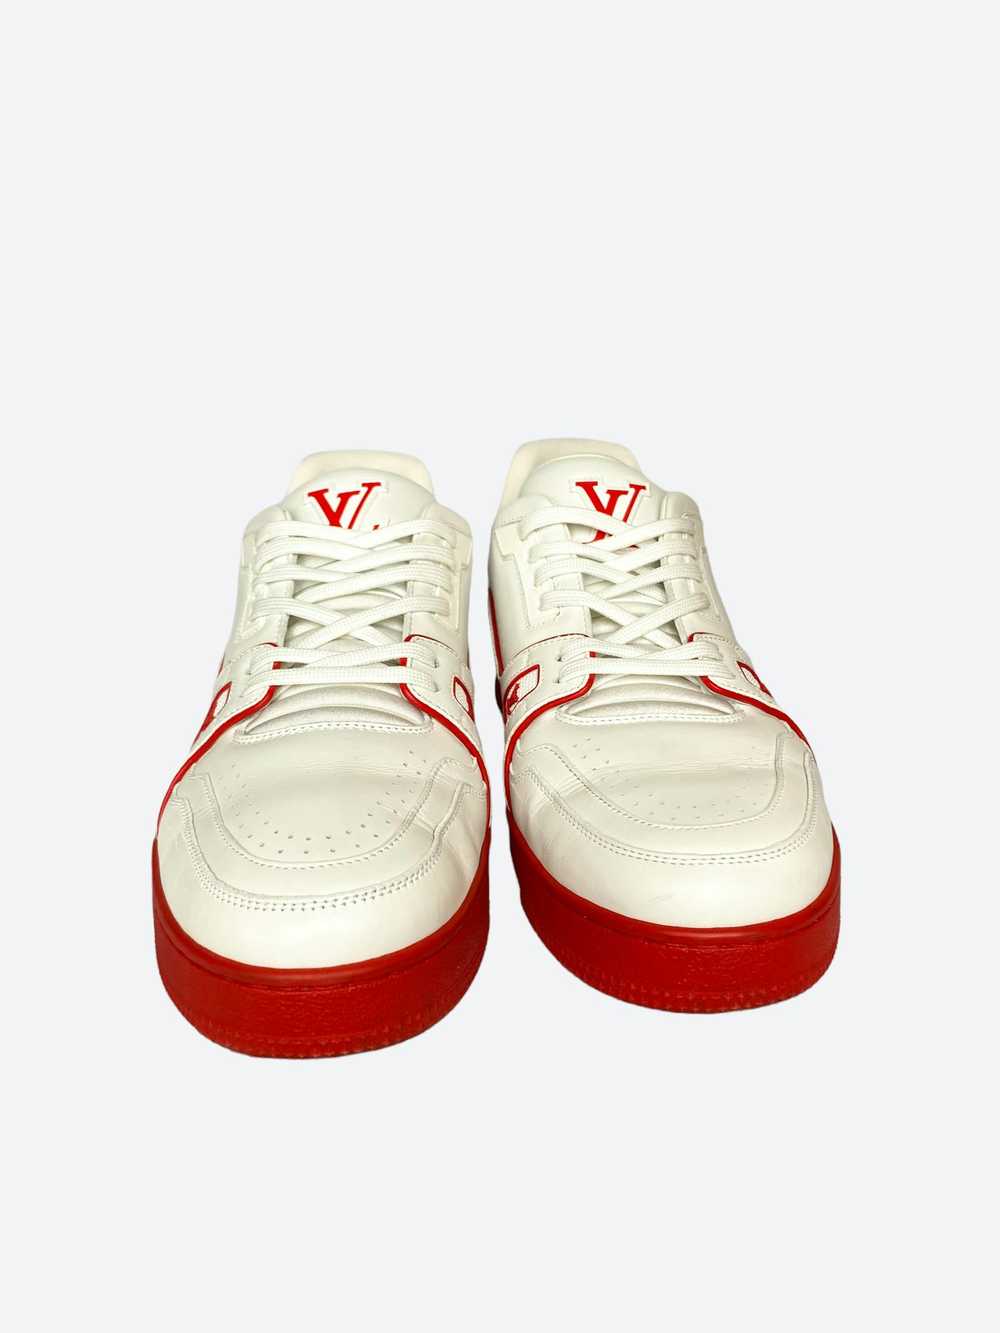 Louis Vuitton Louis Vuitton White & Red Trainers - image 5